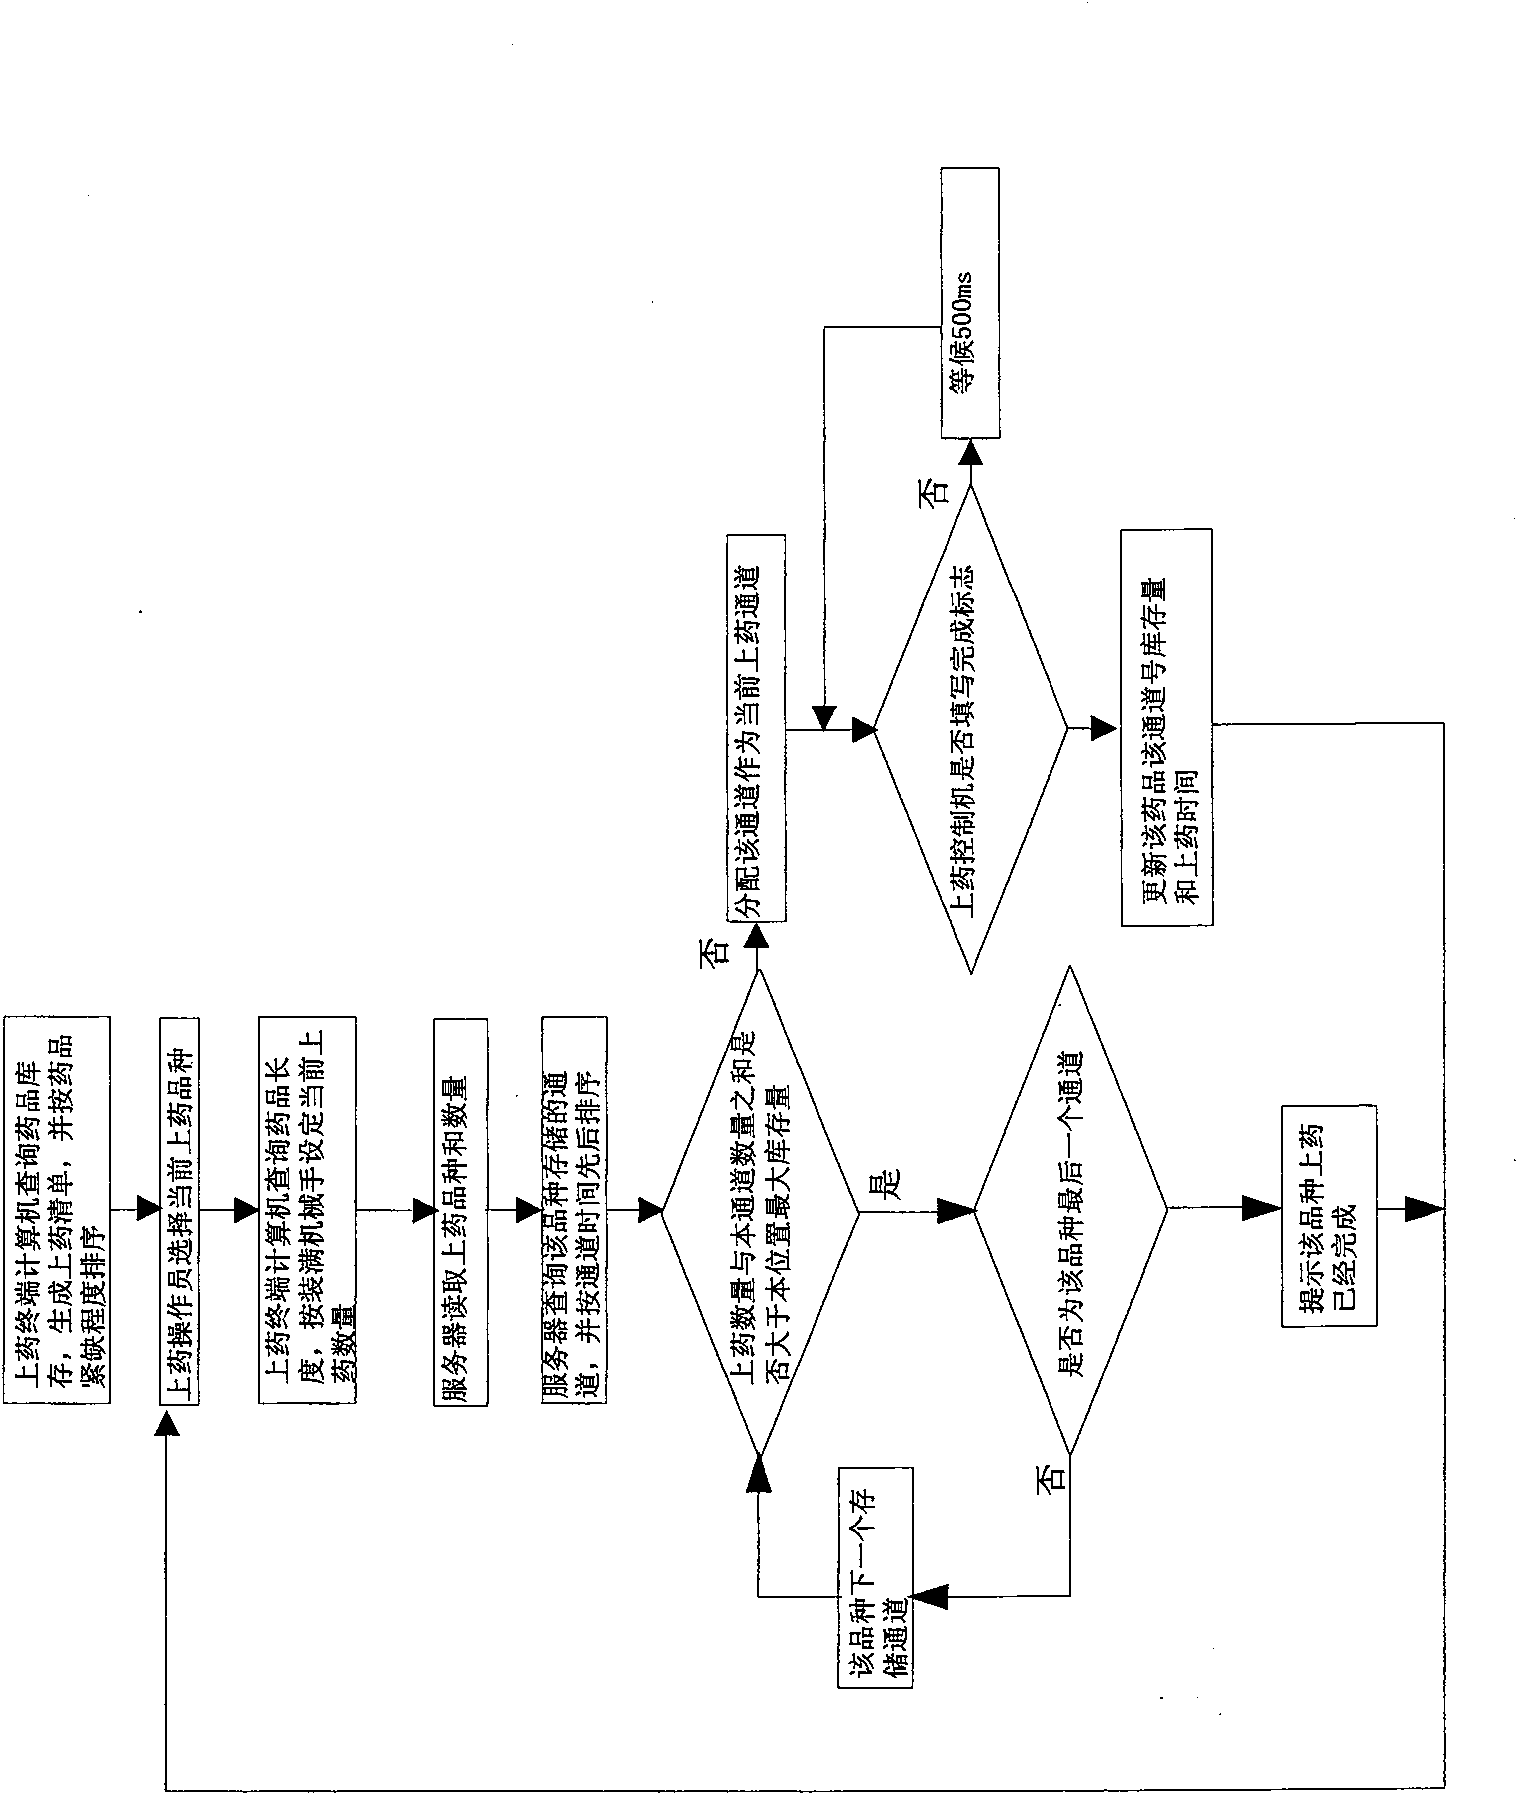 Automatization drug-store computer control managing method and system